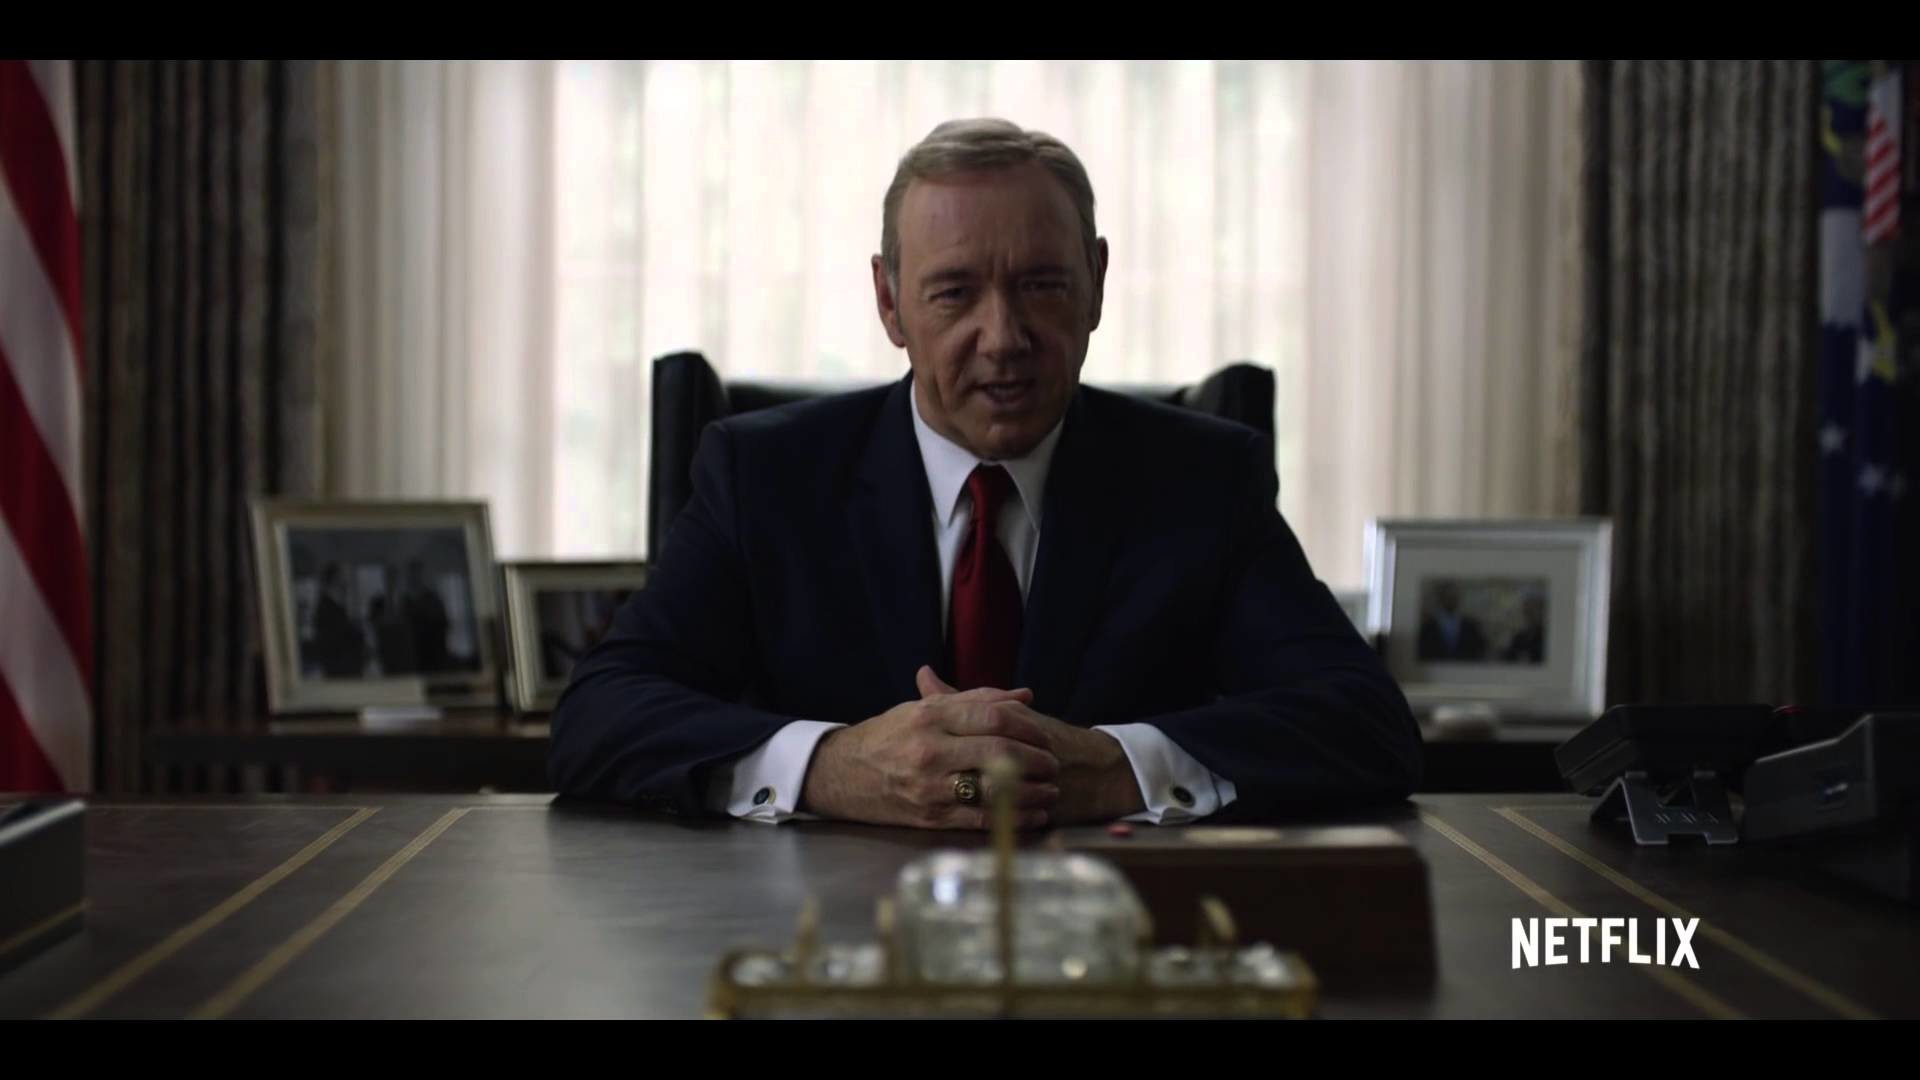 House of Cards – Official Trailer Season 4